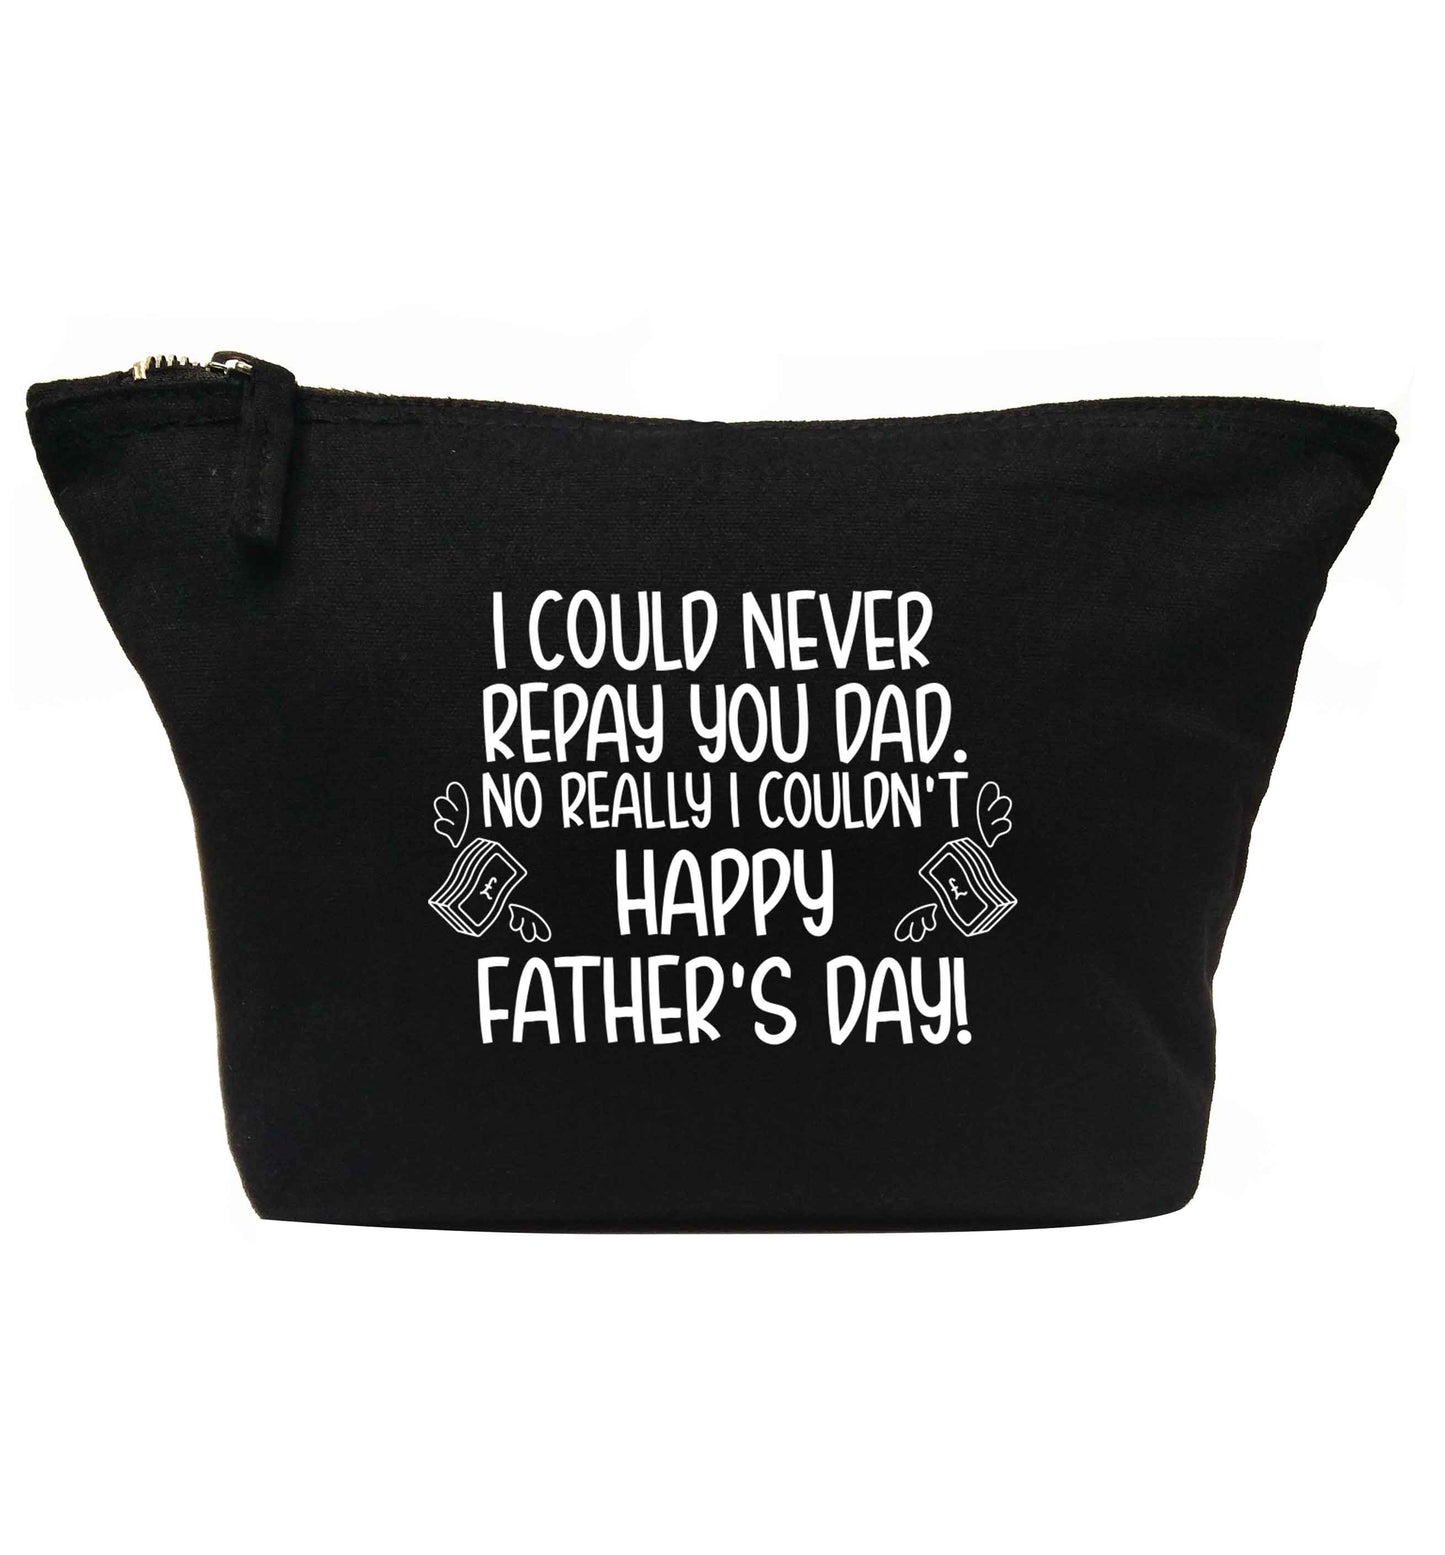 I could never repay you dad. No I really couldn't happy Father's day! | Makeup / wash bag